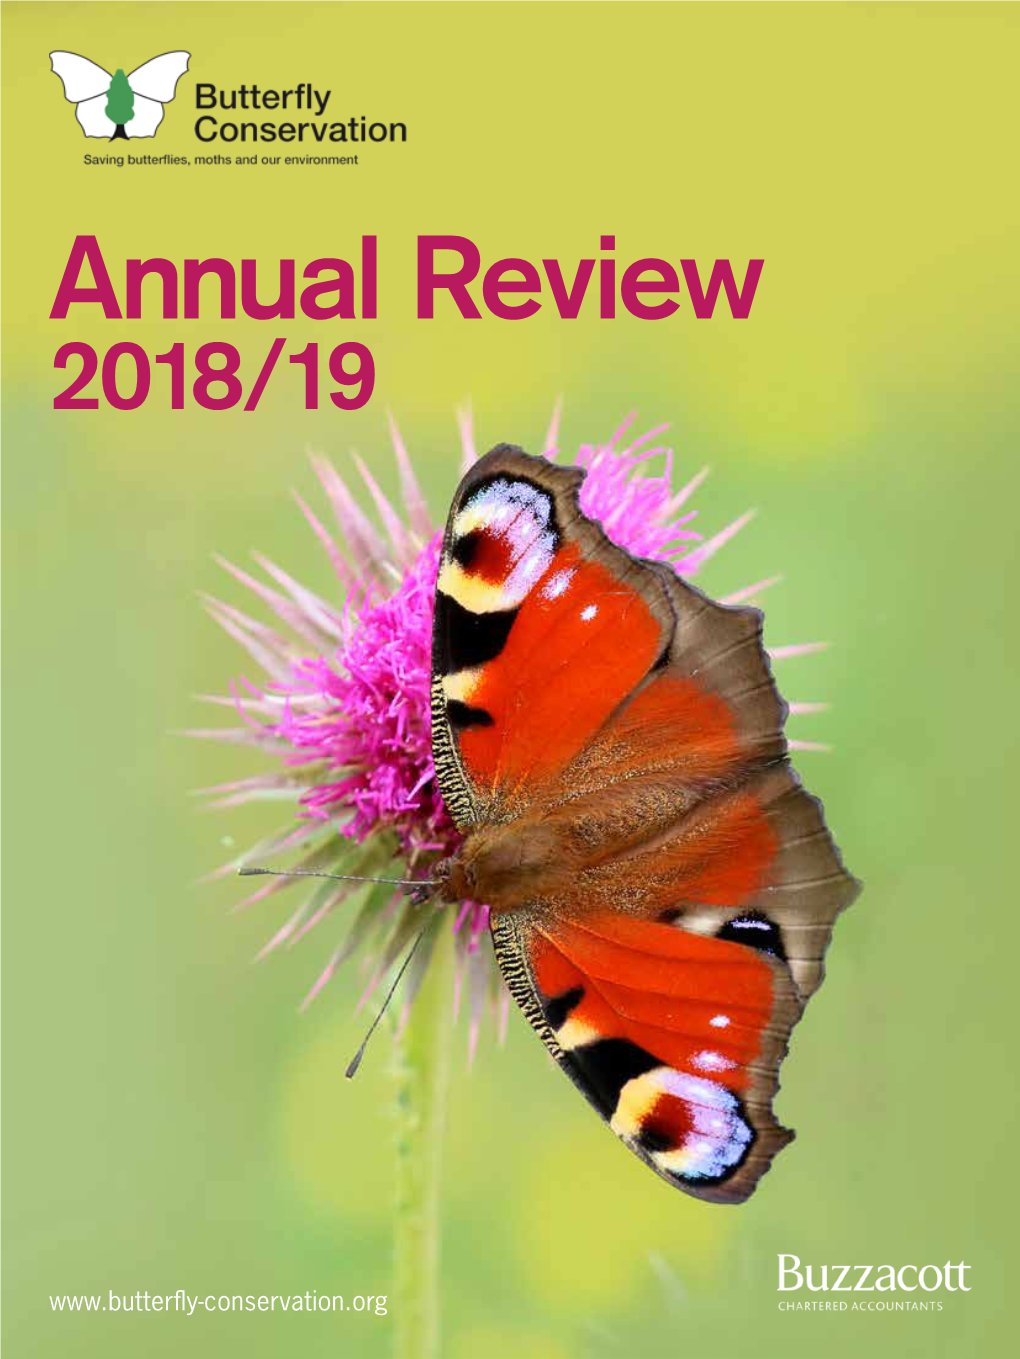 Annual Review for 2018/19